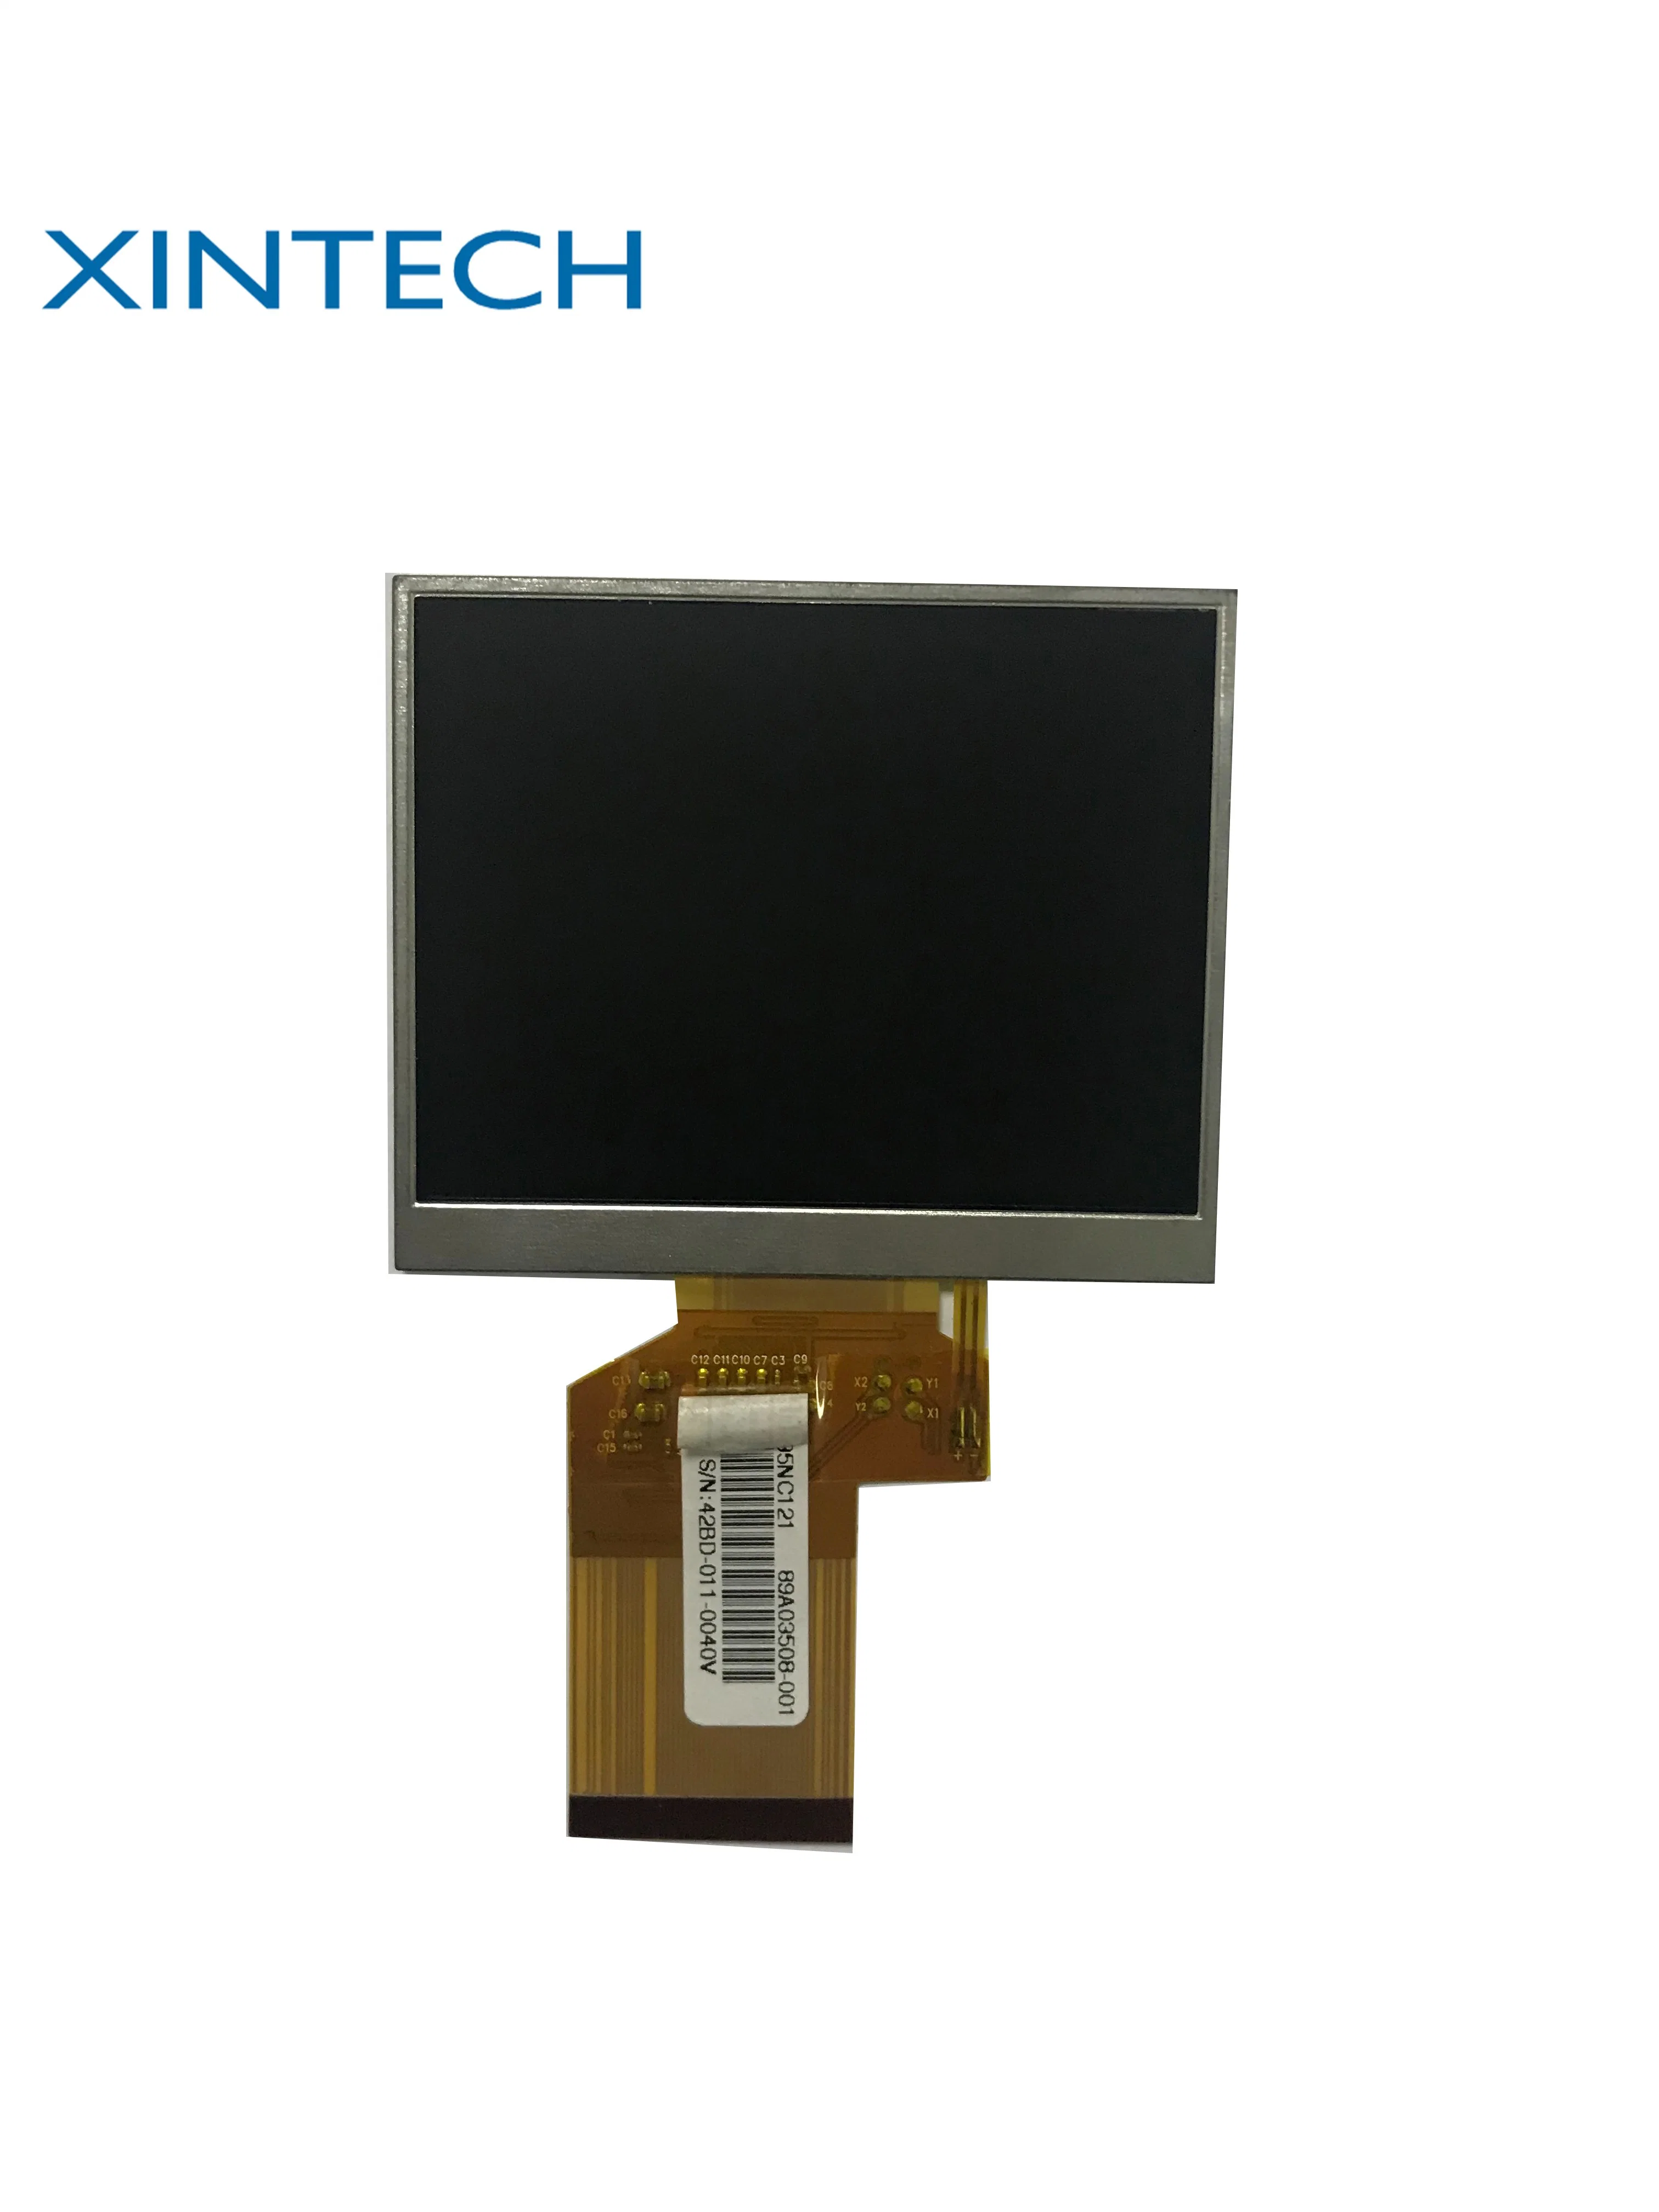 Hot Selling 2.3 Inch Sunlight Readable TFT Module LCD Panel